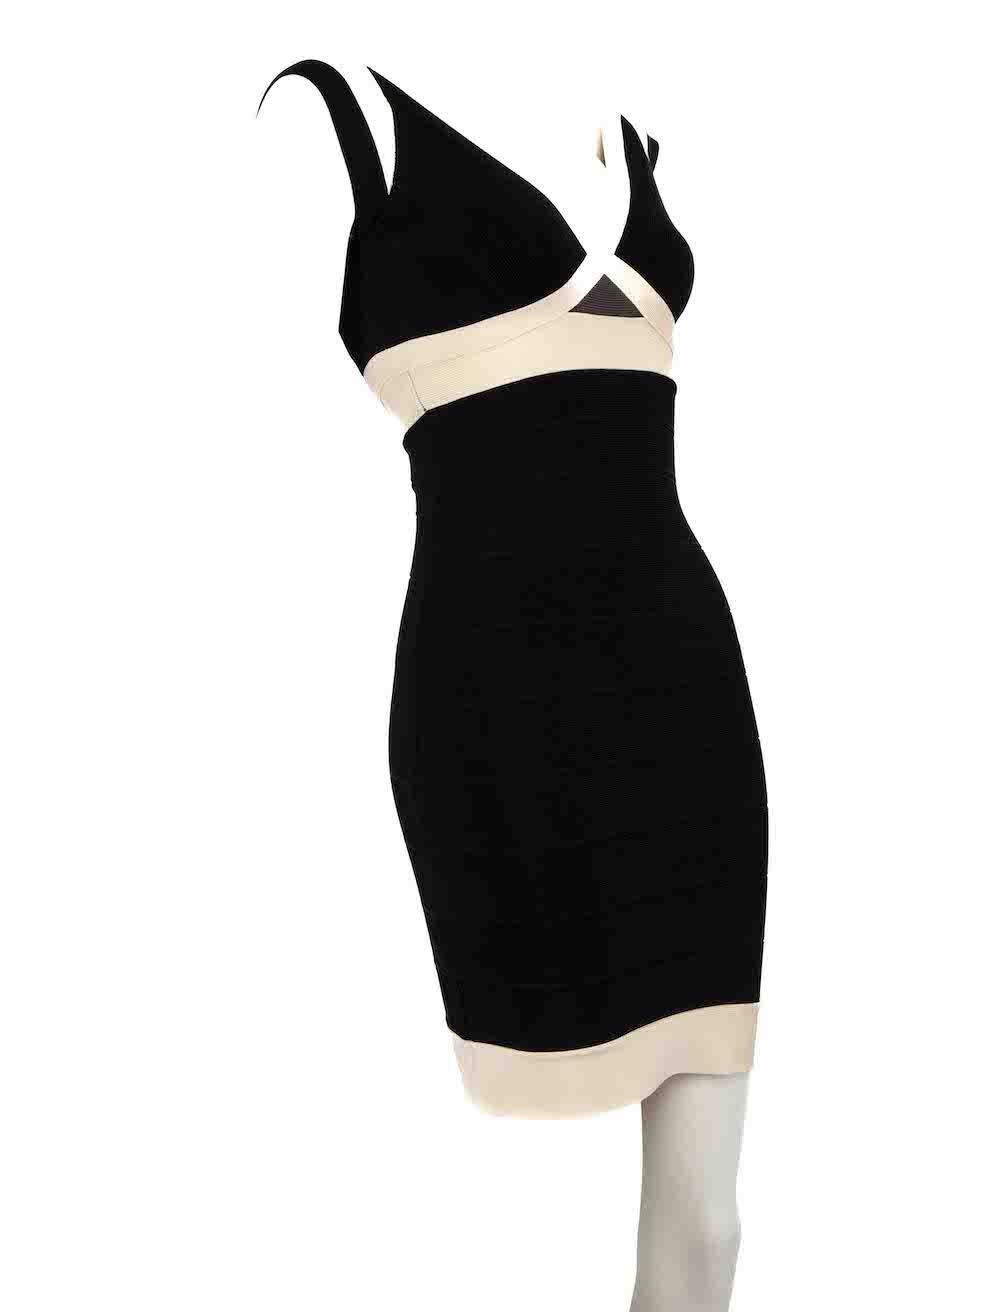 CONDITION is Never worn, with tags. No visible wear to dress is evident on this new Herve Leger designer resale item.
 
 
 
 Details
 
 
 Black
 
 Rayon
 
 Dress
 
 Bodycon
 
 Sleeveless
 
 Mini
 
 V-neck
 
 White trim
 
 Back zip and hook